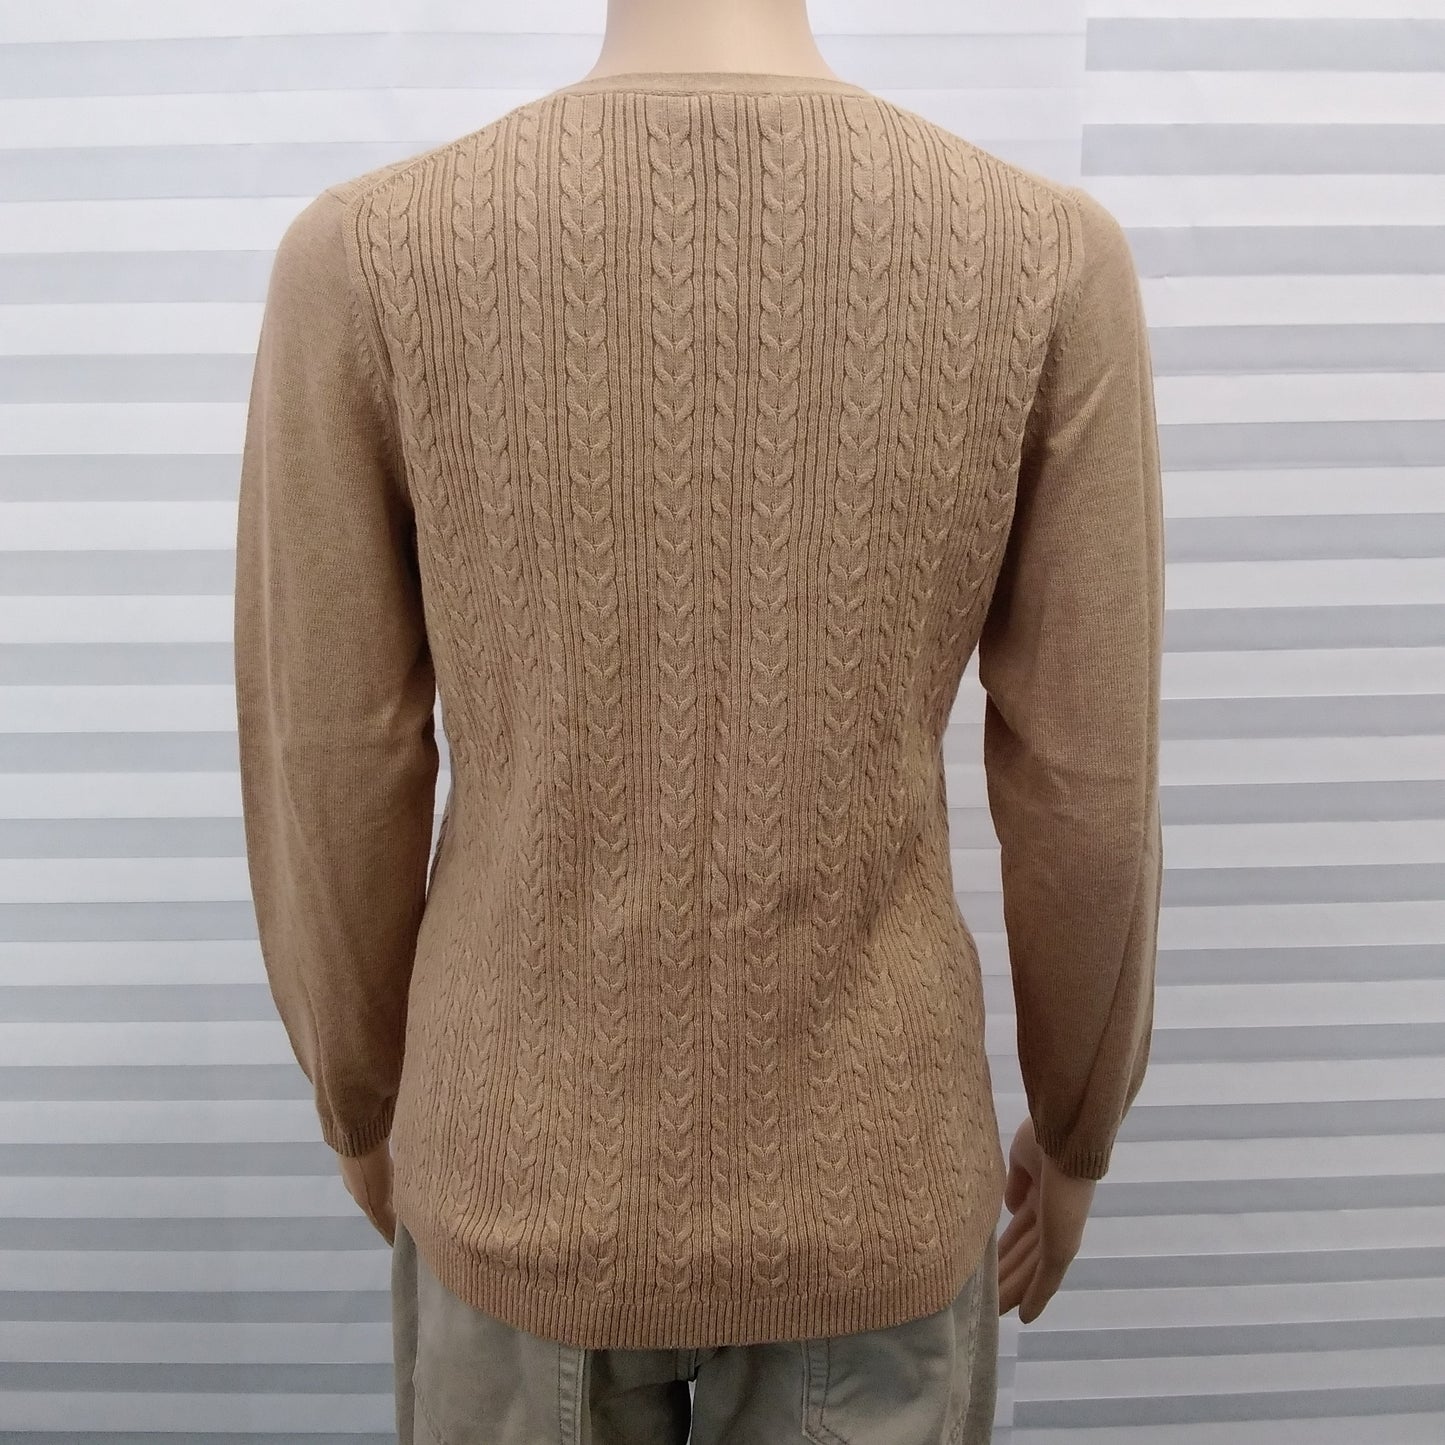 NWT - Talbots Petites Brown Lightweight Cableknit V-Neck Sweater - Size: M